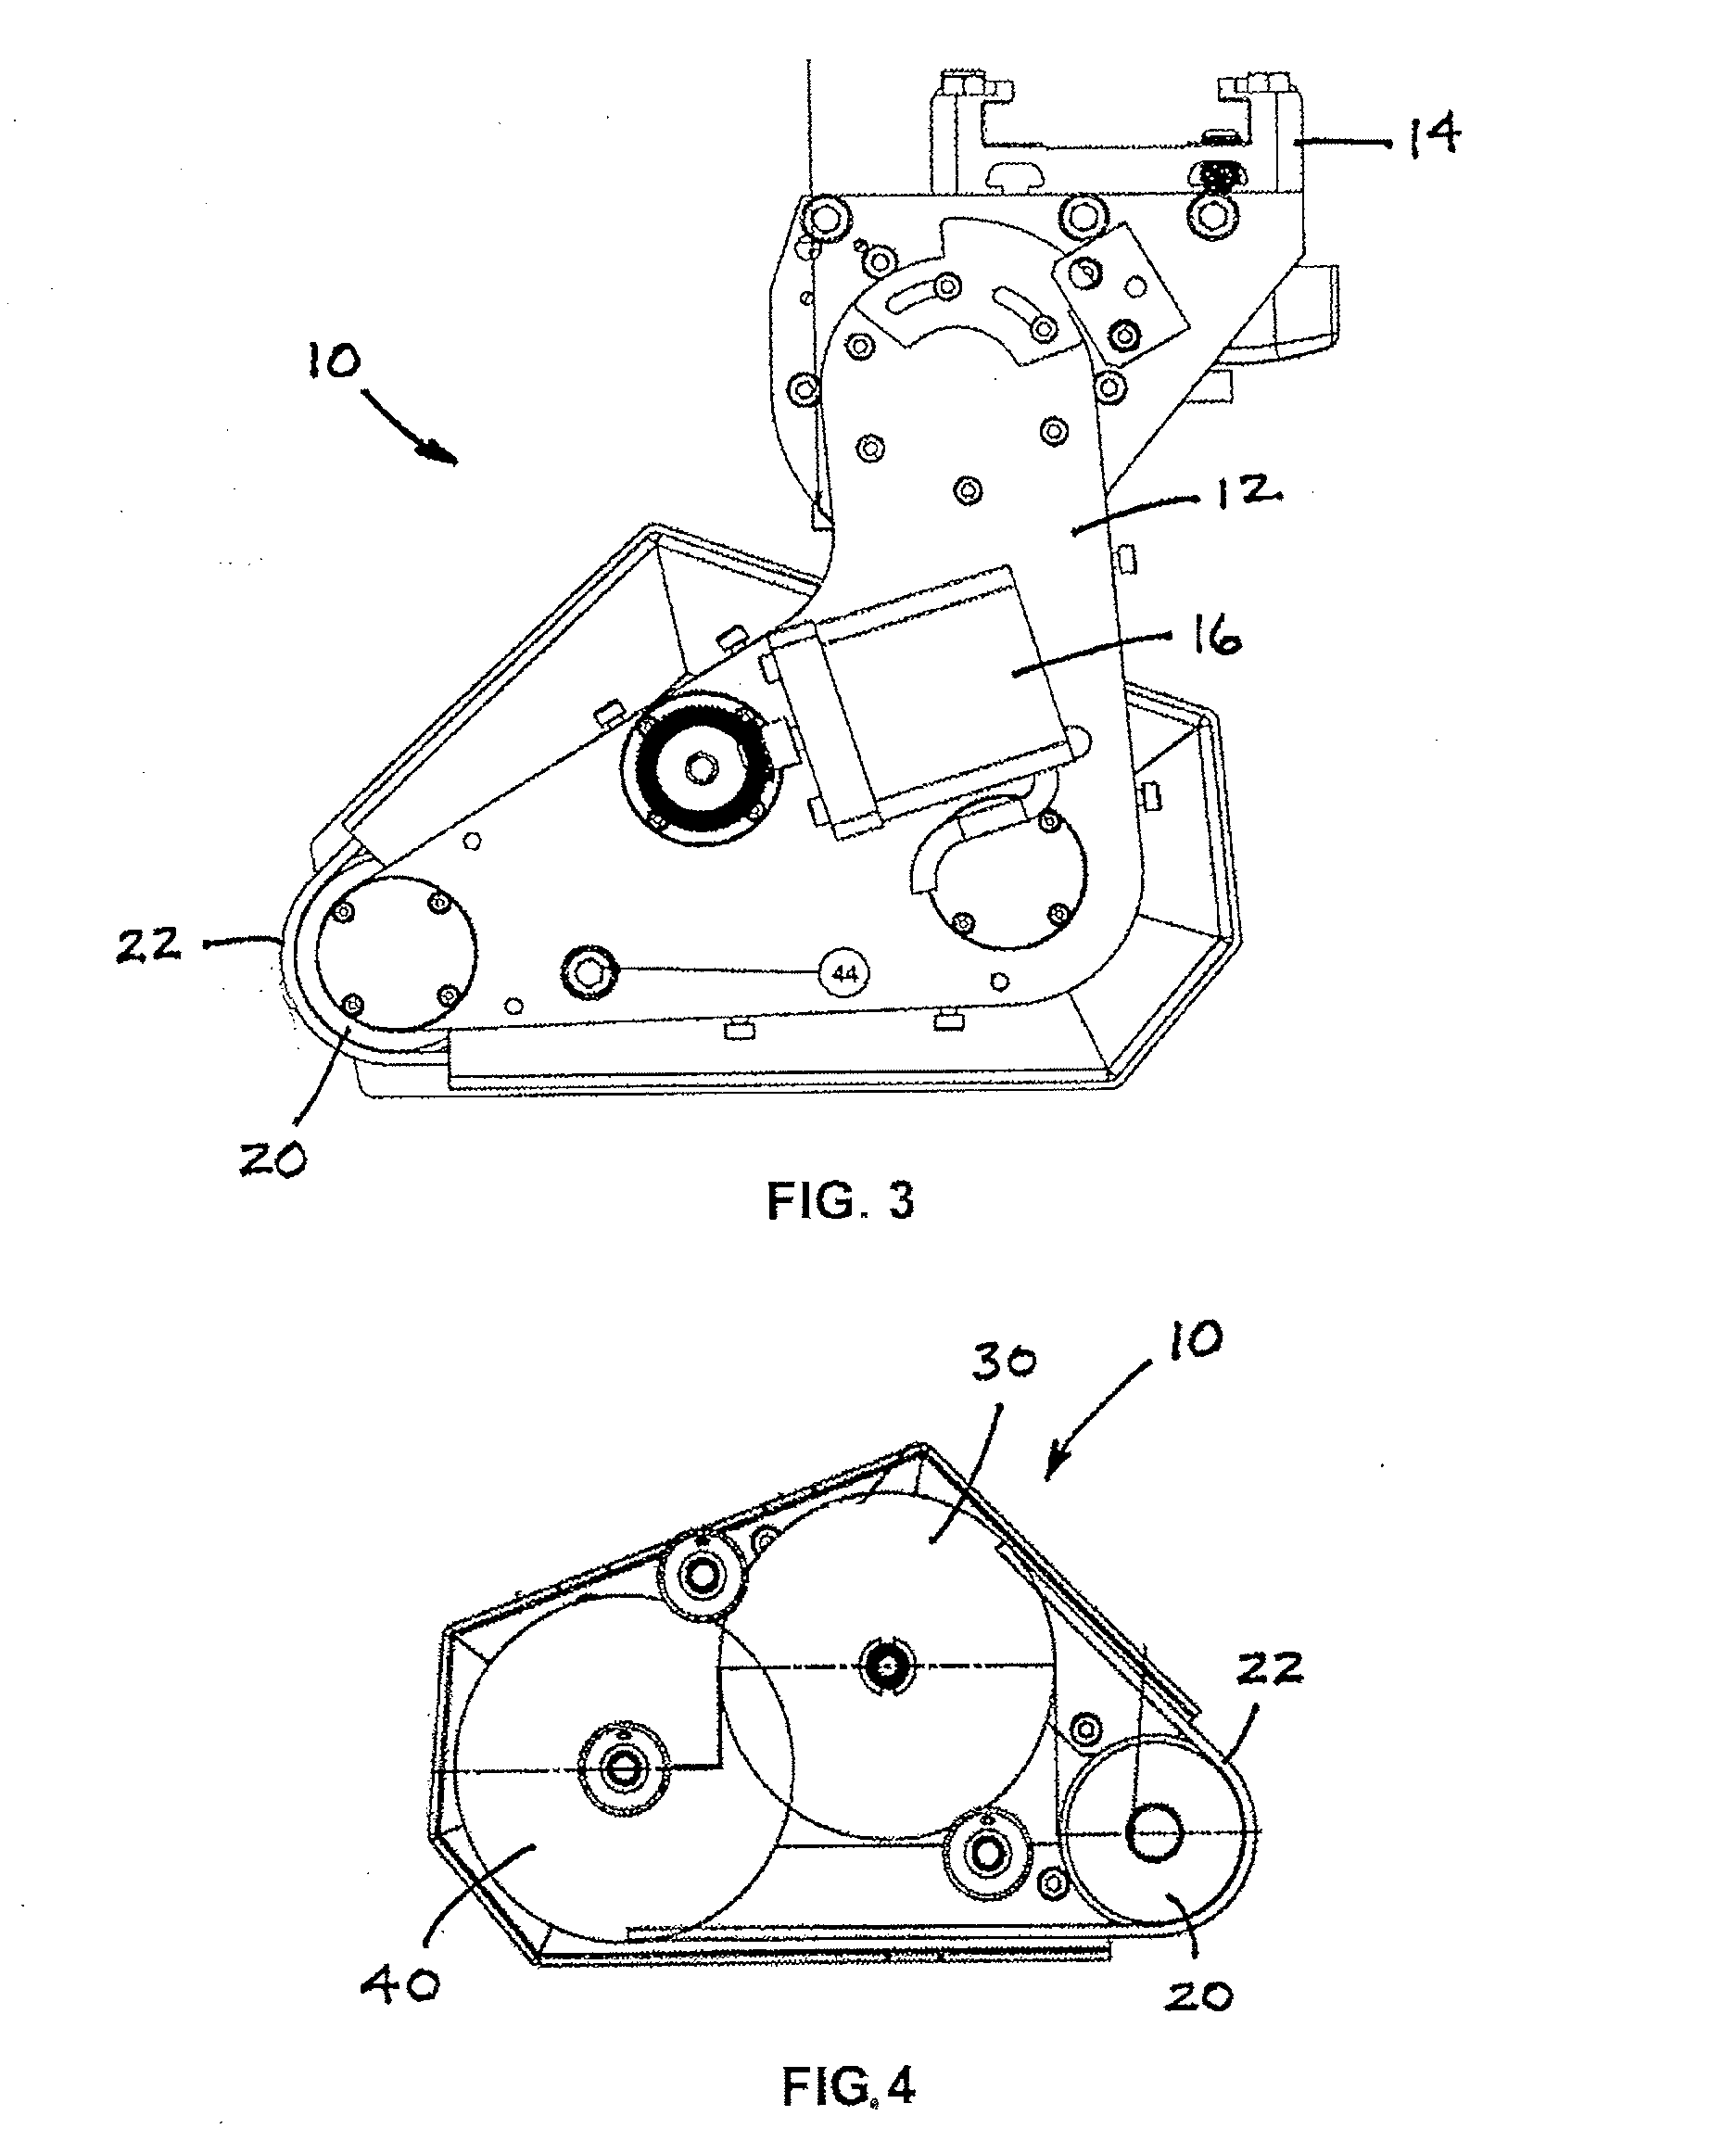 Apparatus, assembly and method for dry cleaning a flexographic printing plate carried on a plate cylinder that includes optimized cleaning functionalities